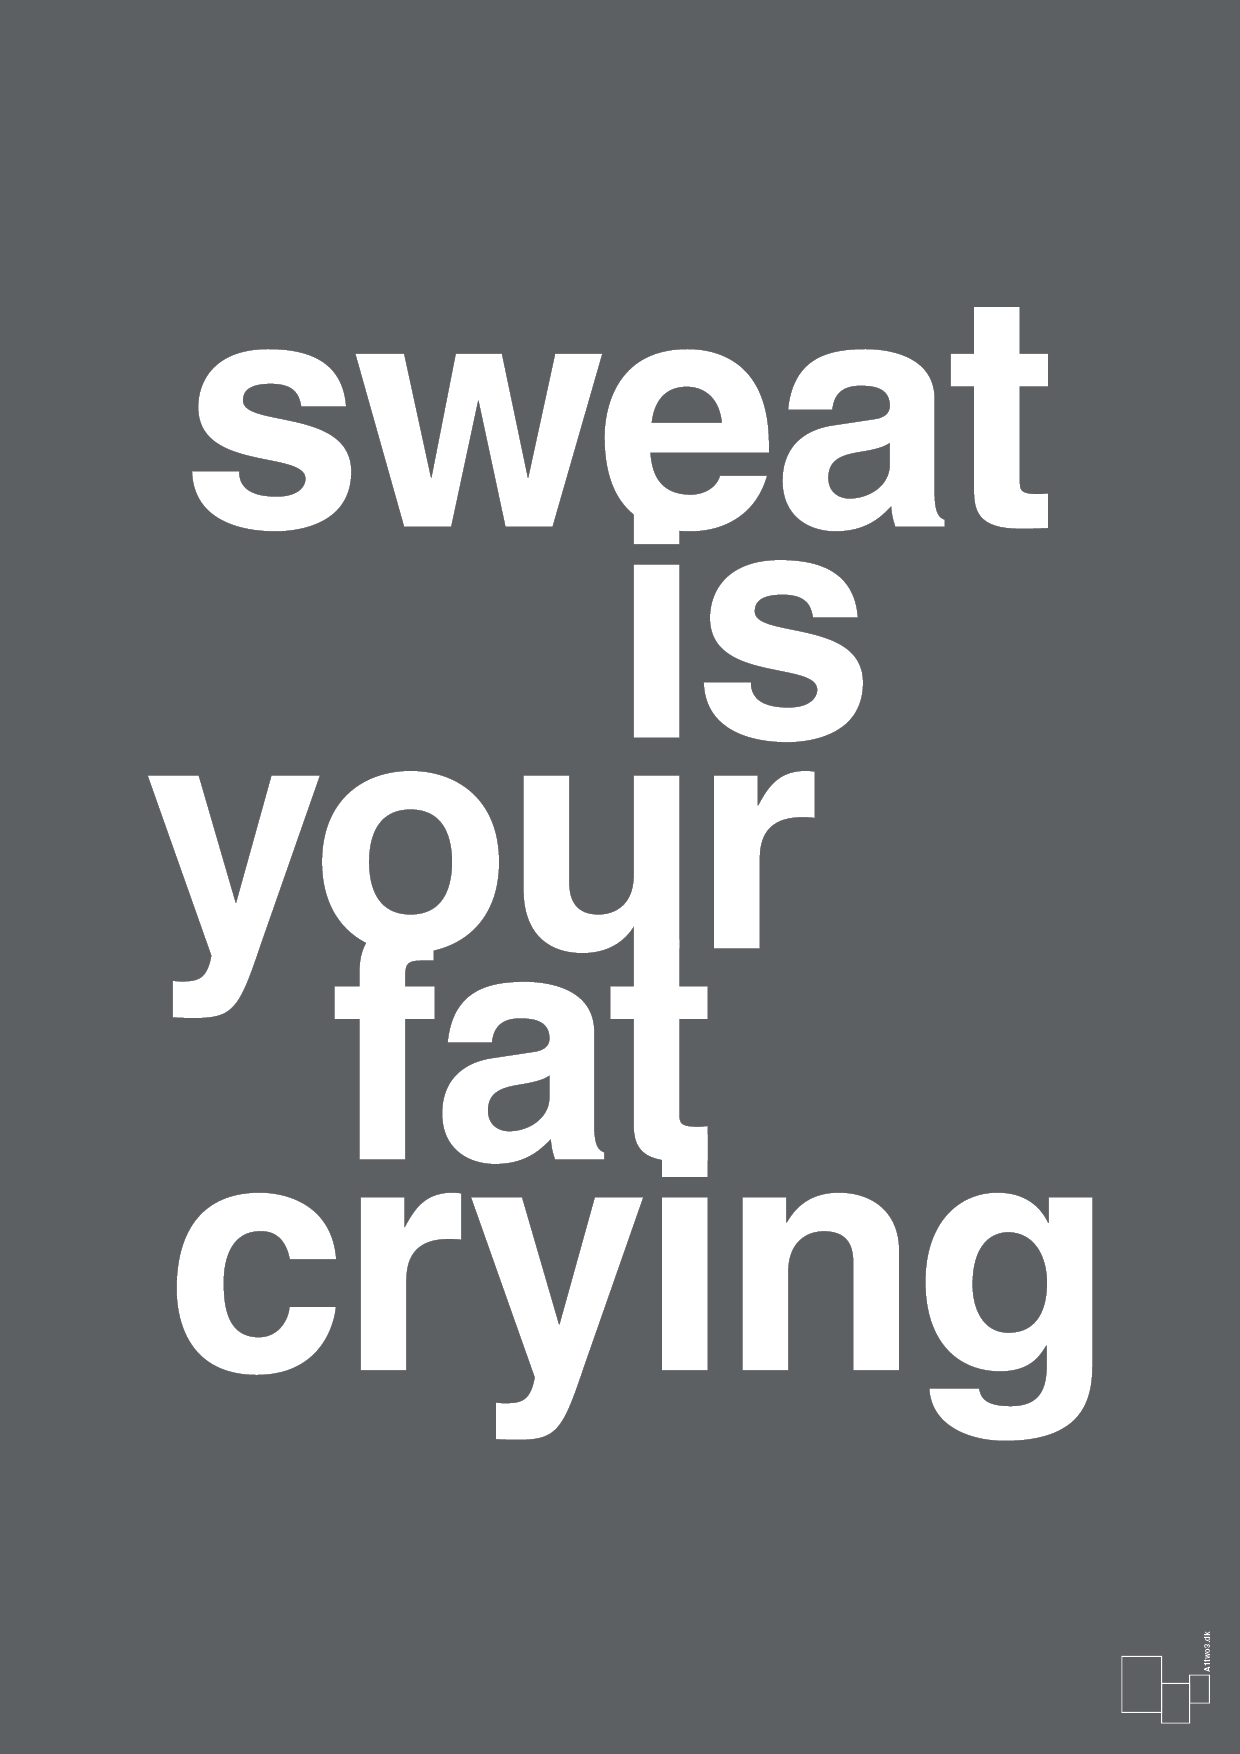 sweat is your fat crying - Plakat med Sport & Fritid i Graphic Charcoal